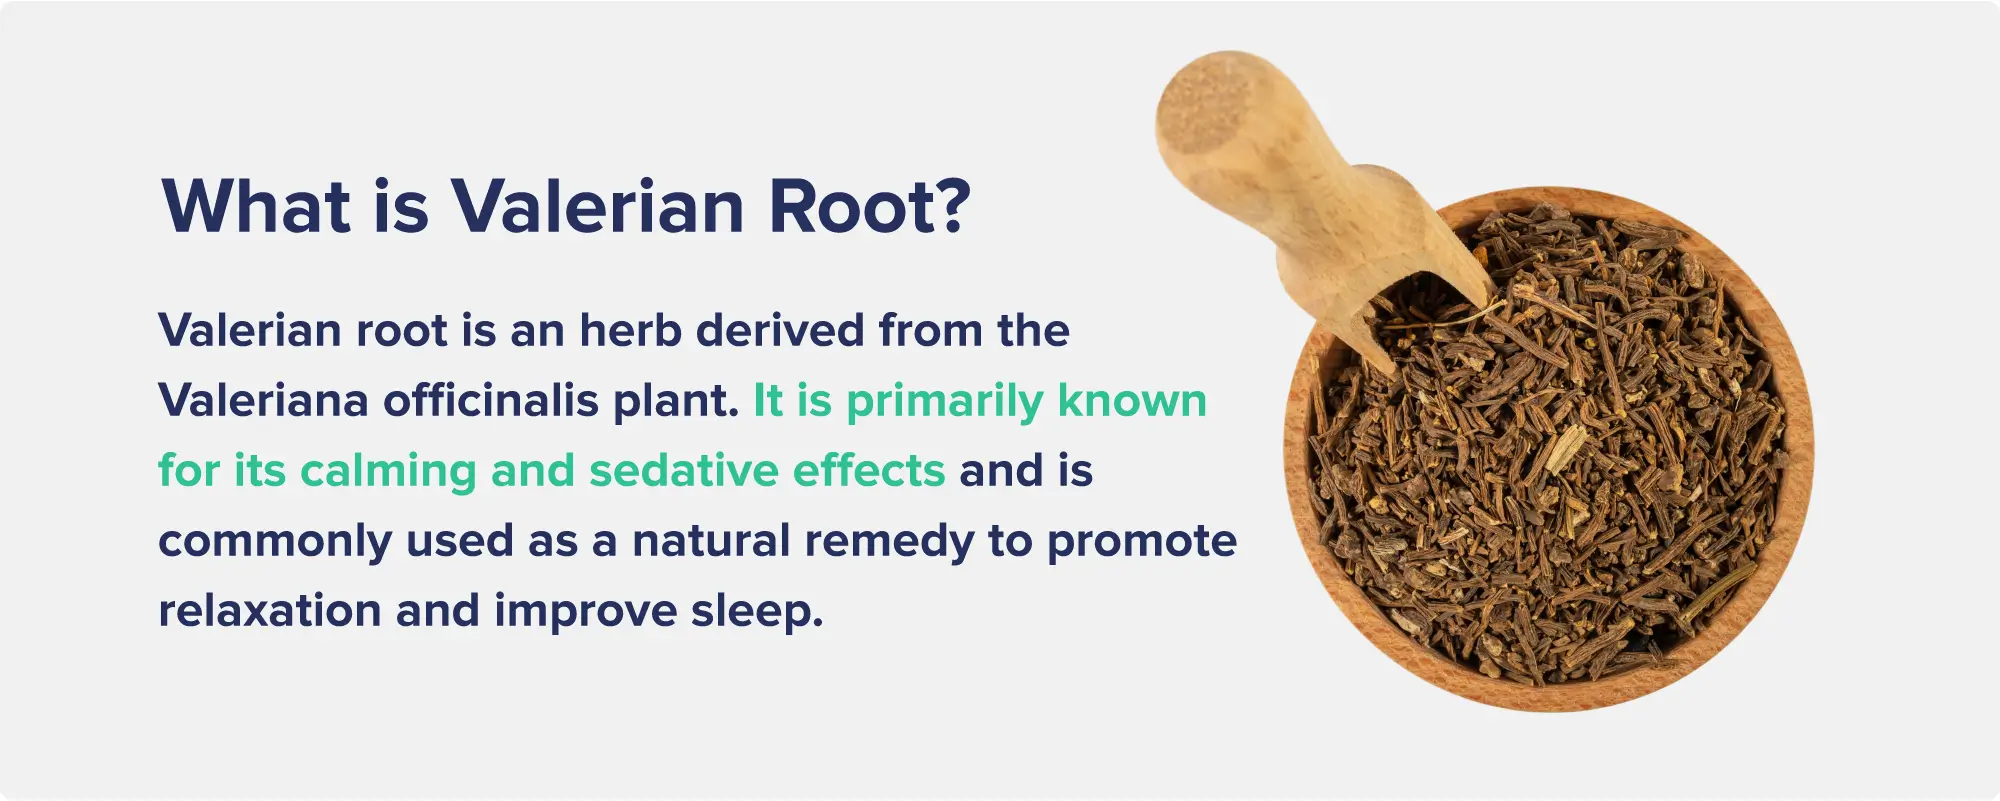 What Is Valerian Root?